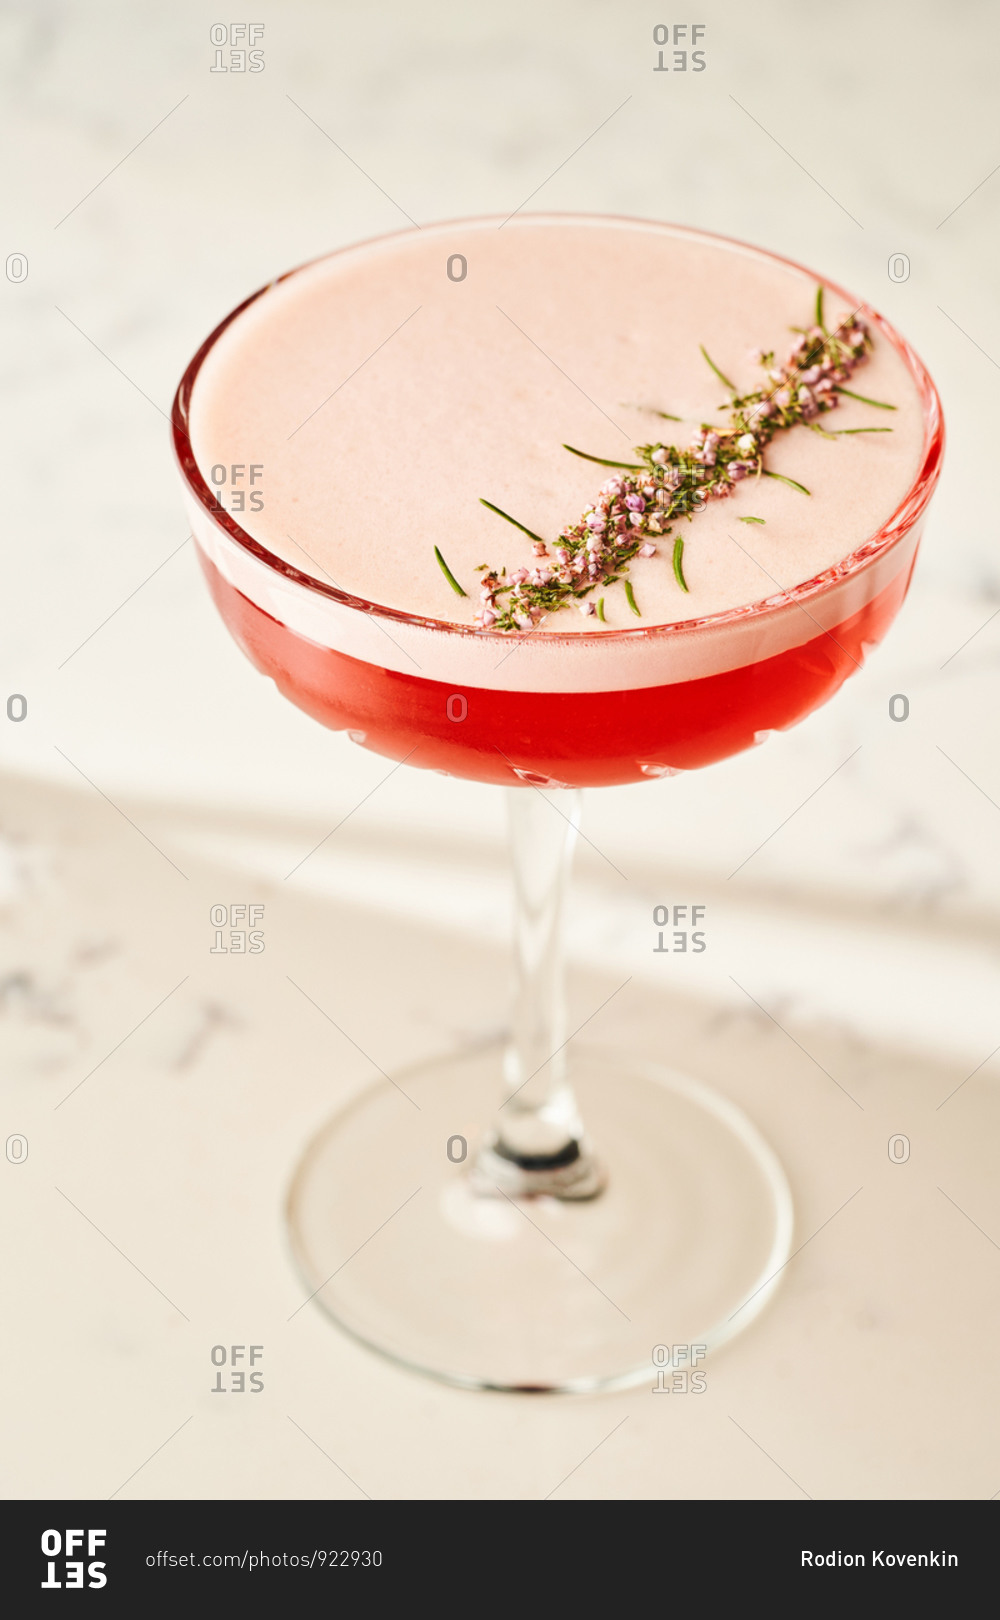 Beautifully garnished pink lady cocktail on white marble bar countertop